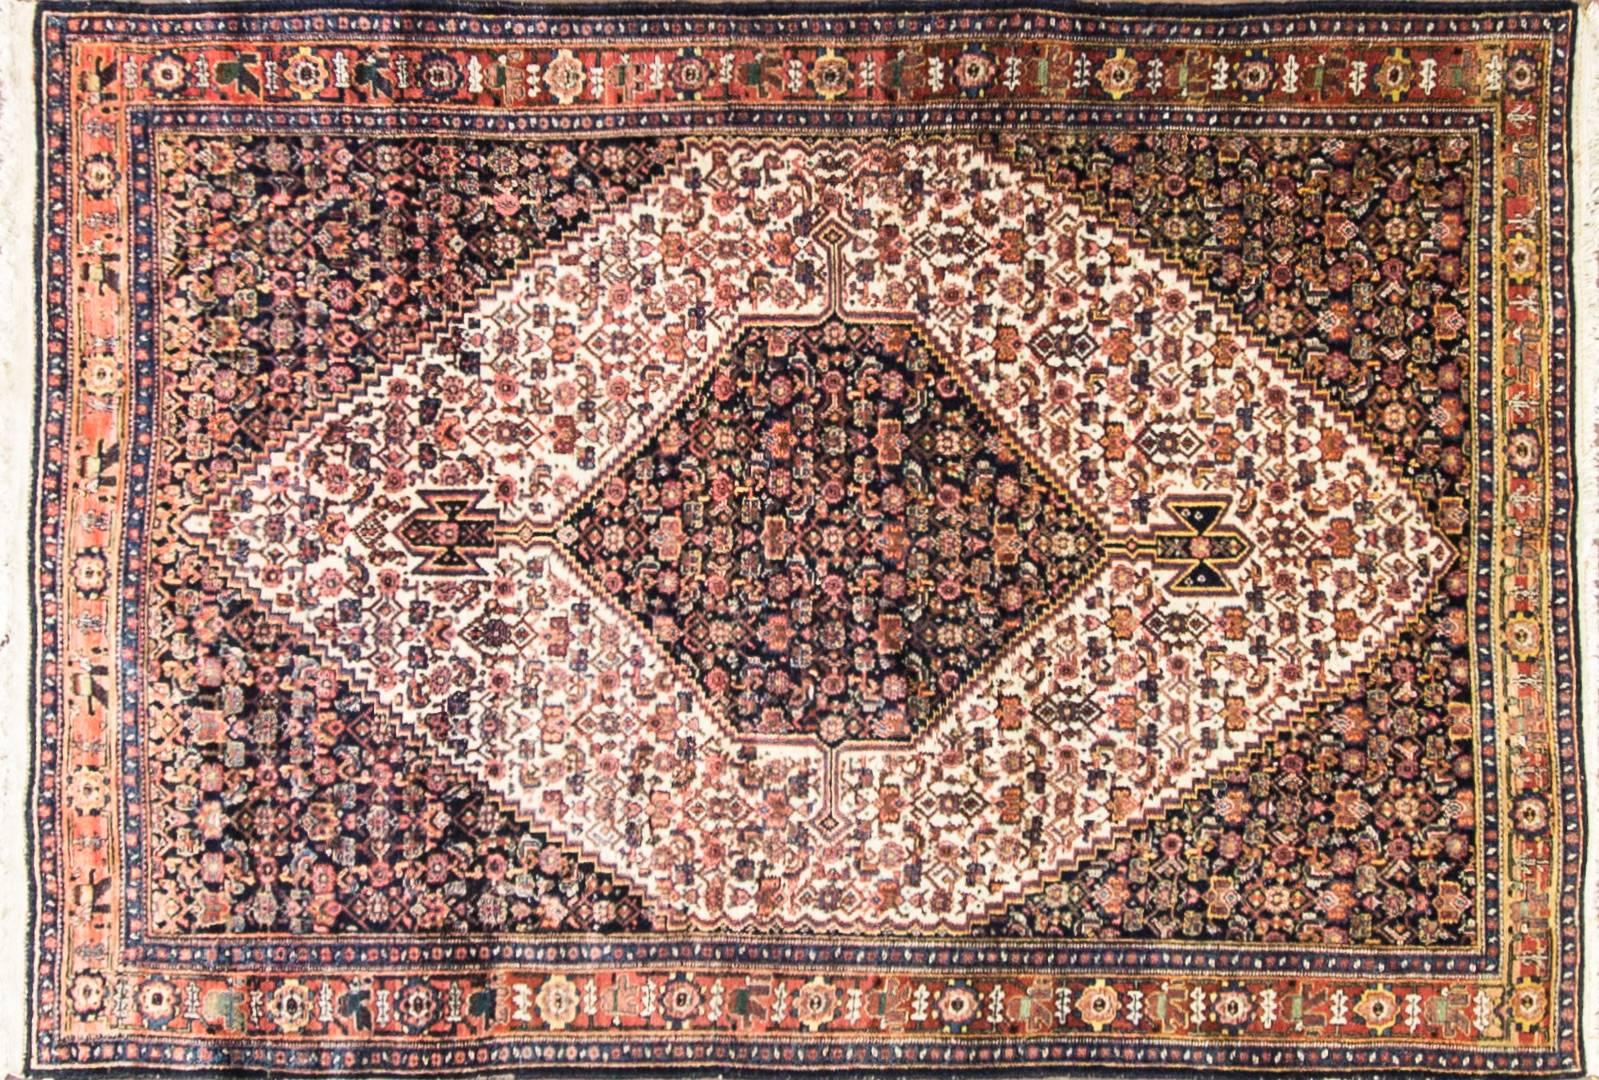  Persian Senneh Rug
The province of Kurdistan is situated in the western part of Iran. Its capital today is Sanandaj, but in the context of carpets, the older name, Senneh, is still used. Around the province the Kurdish people weave strong, durable